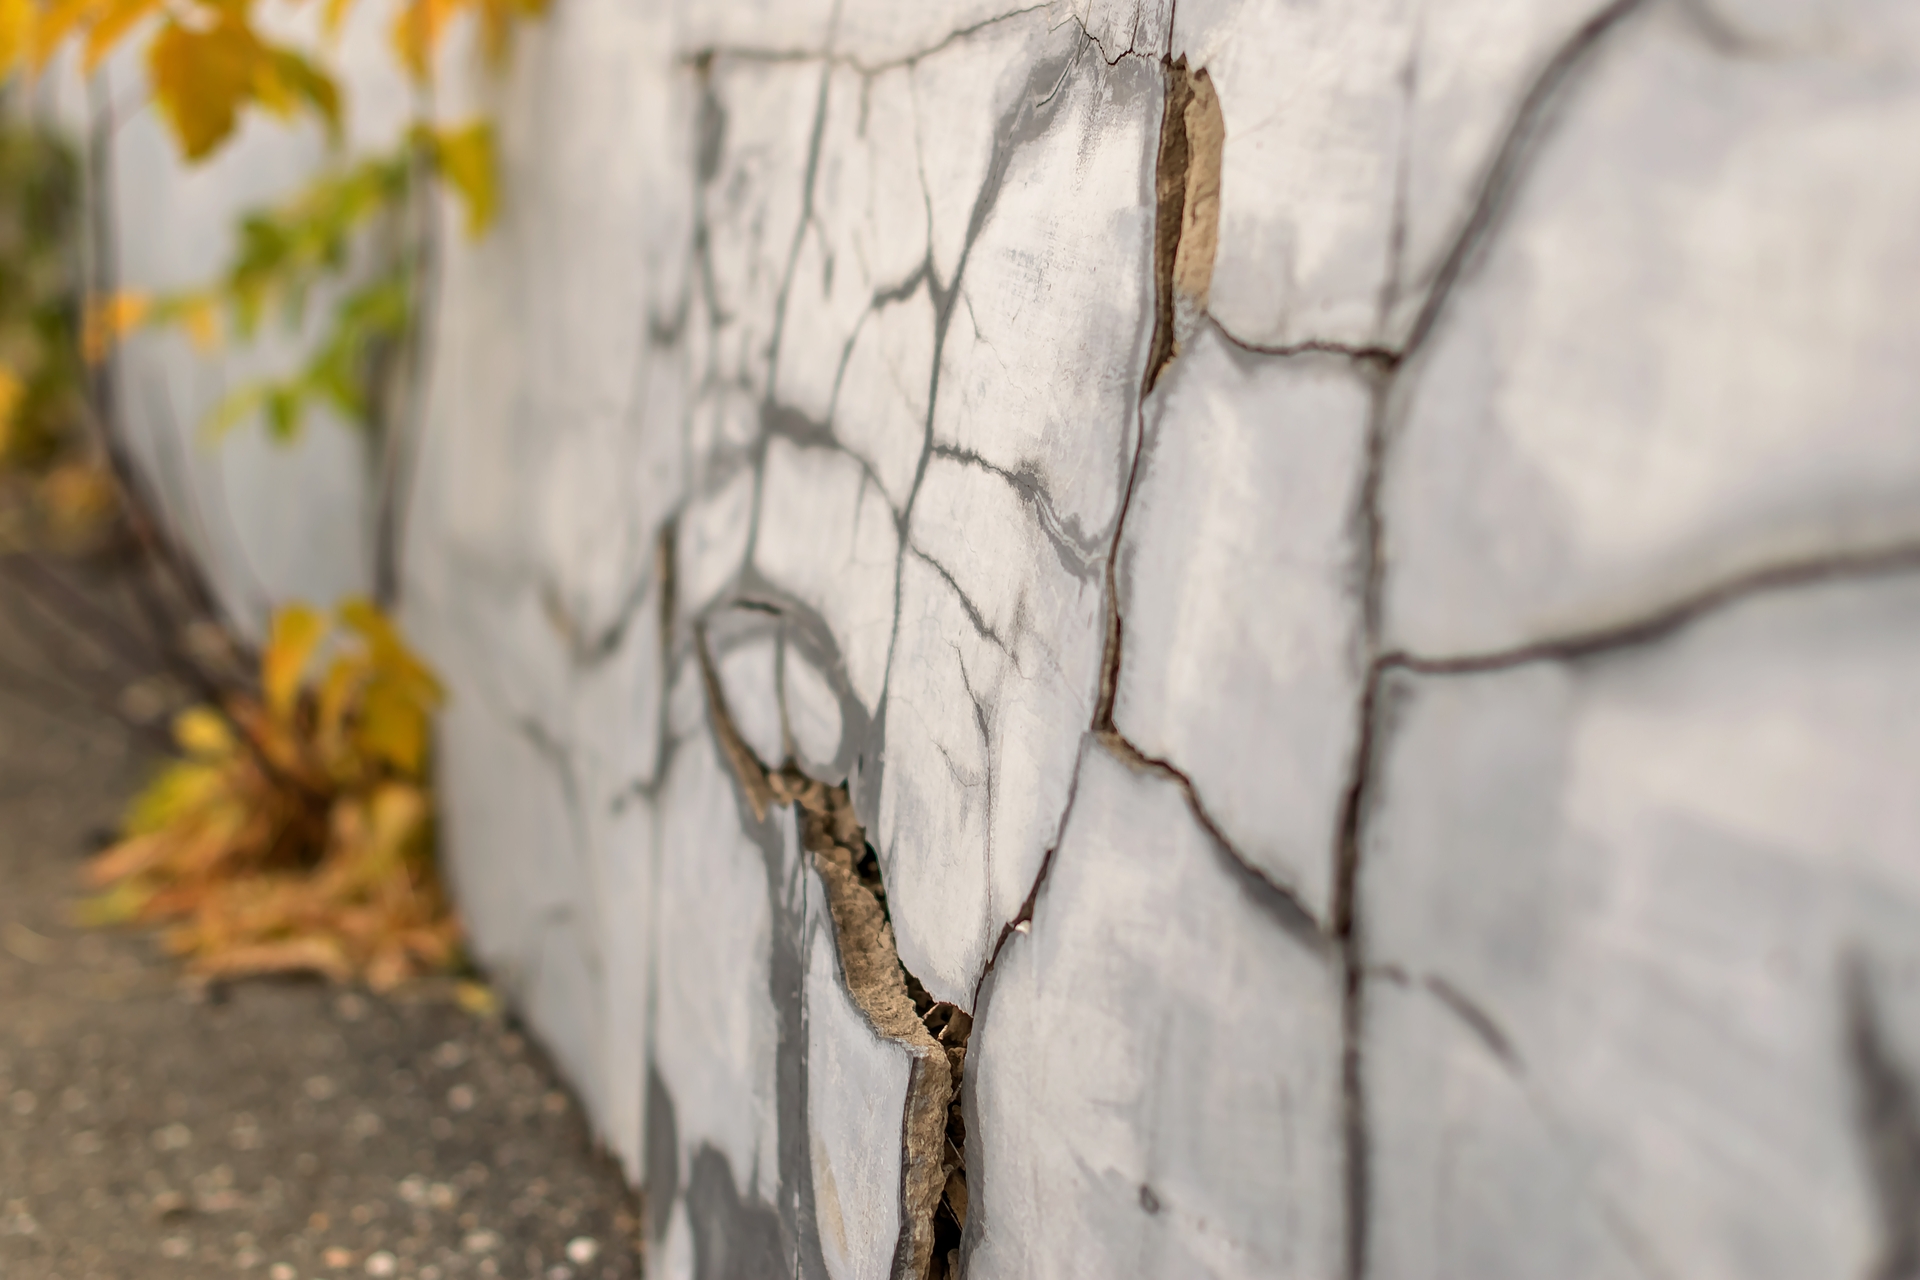 Close-up image of the cracked foundation of a home